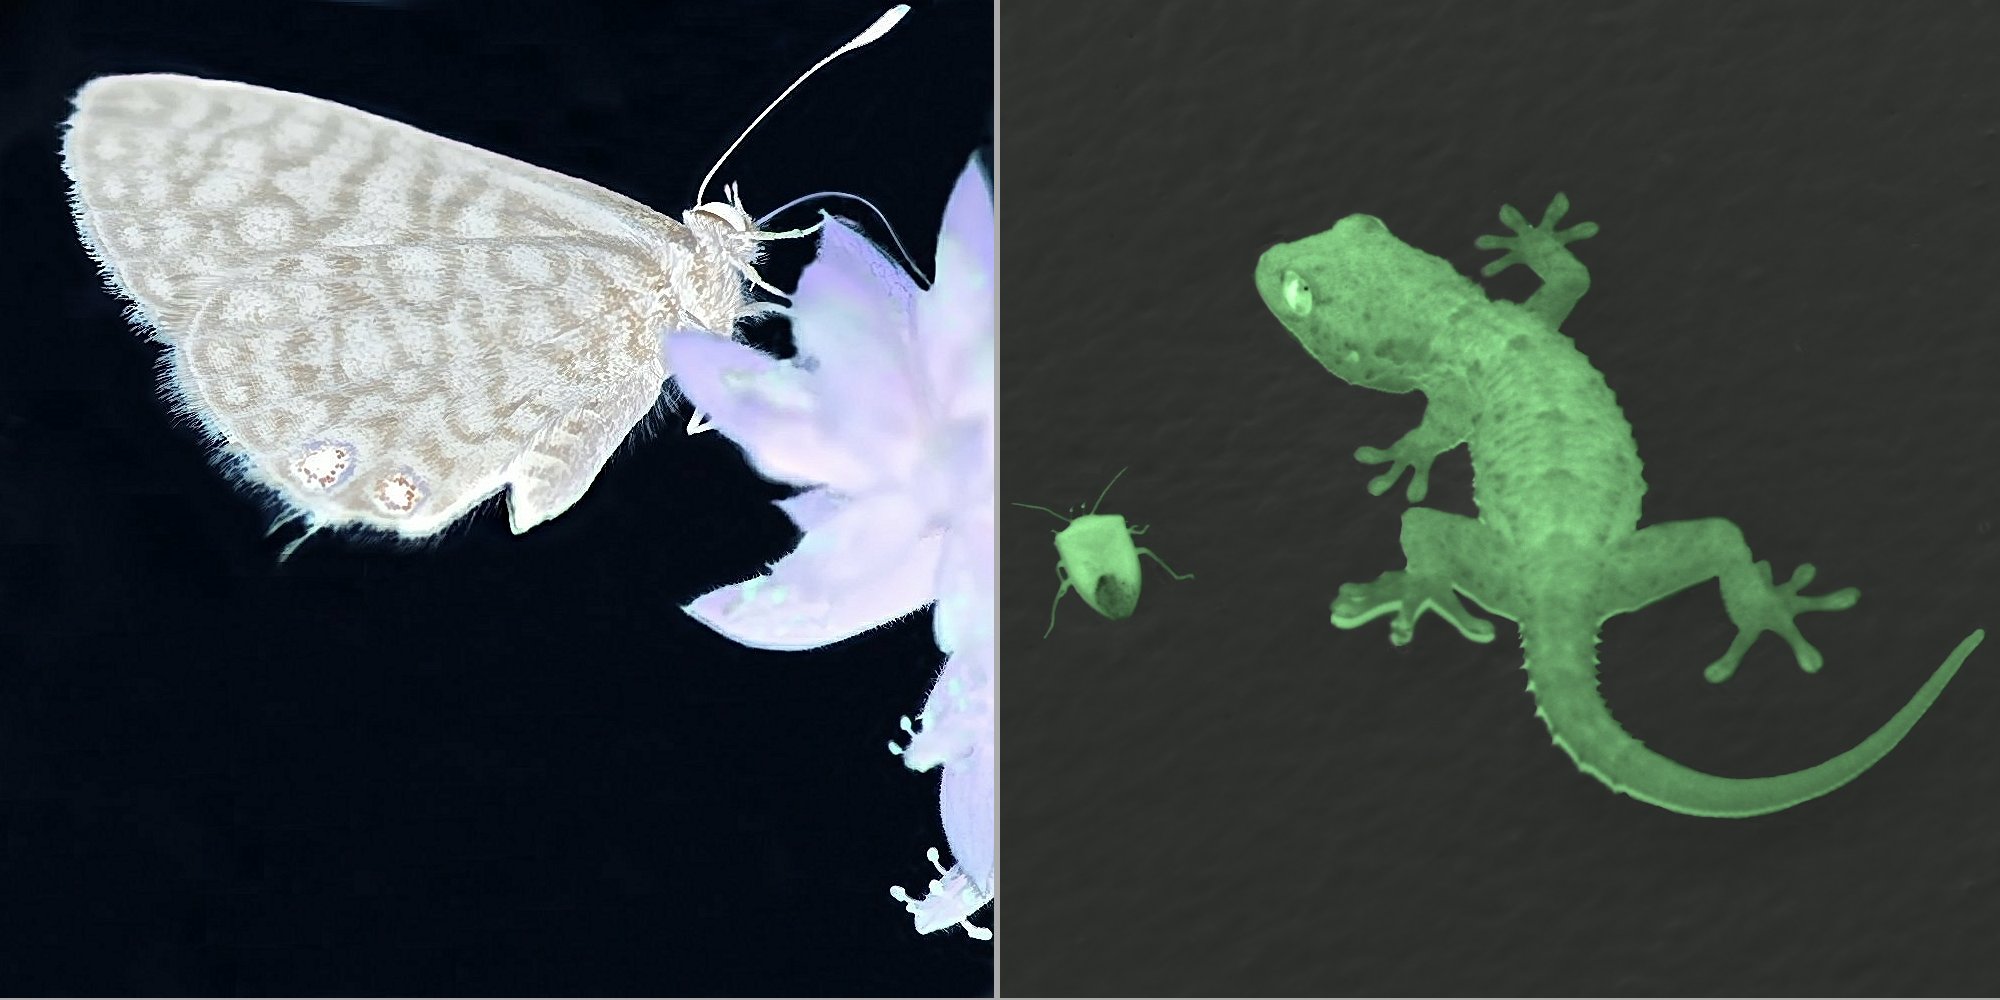 2 examples of images where I had tweaked the colours balance, the first is a negative image of a species on a flower, the second is a neon green gecko and shield bug